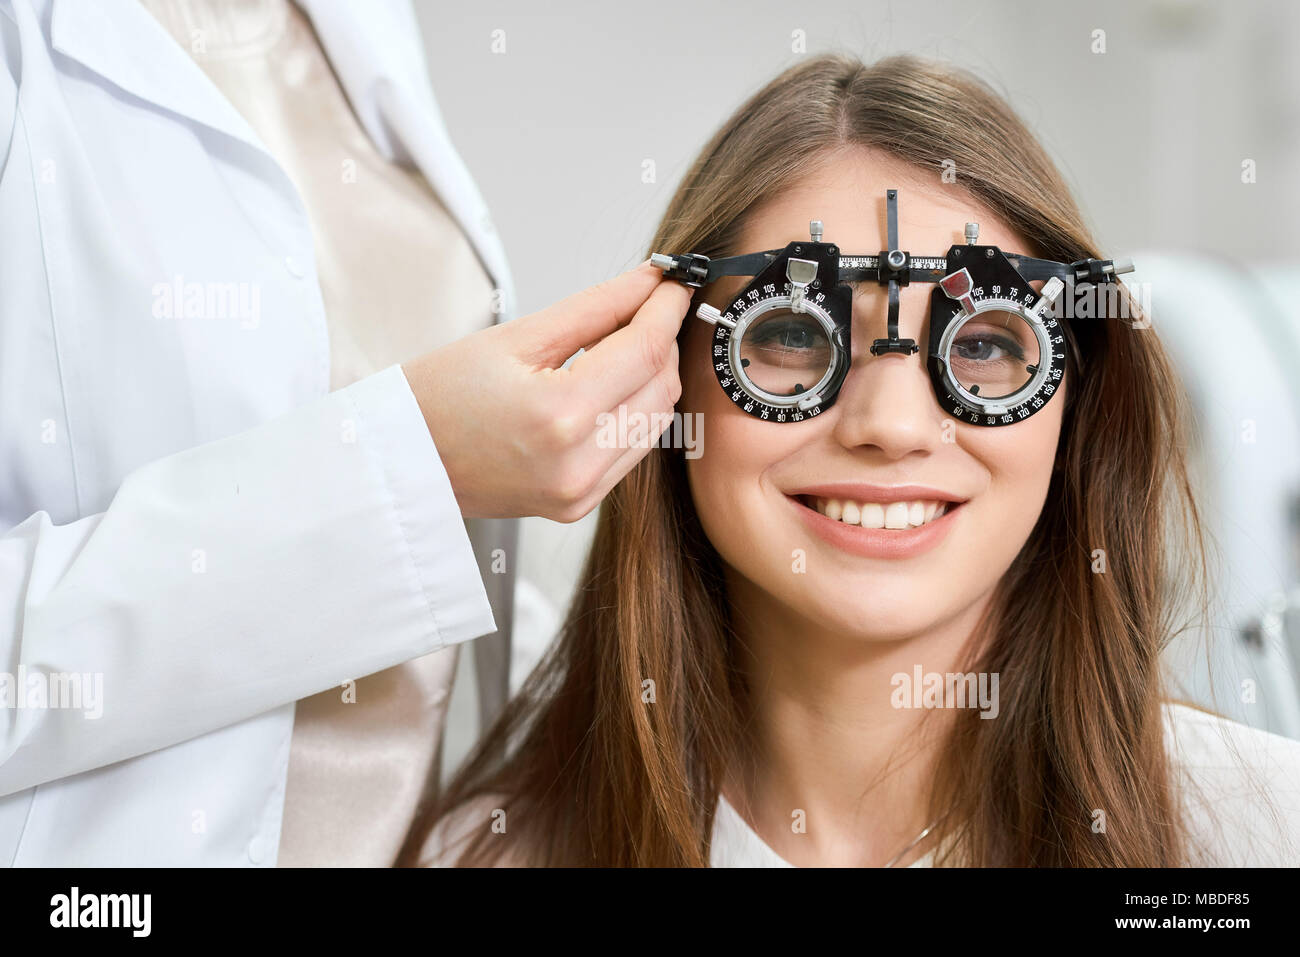 Young pretty patient wearing visual inspection device during admission to an ophthalmologist. Health saving, vision imroving. Feeling satisfied. Doctor is giving advices. Stock Photo